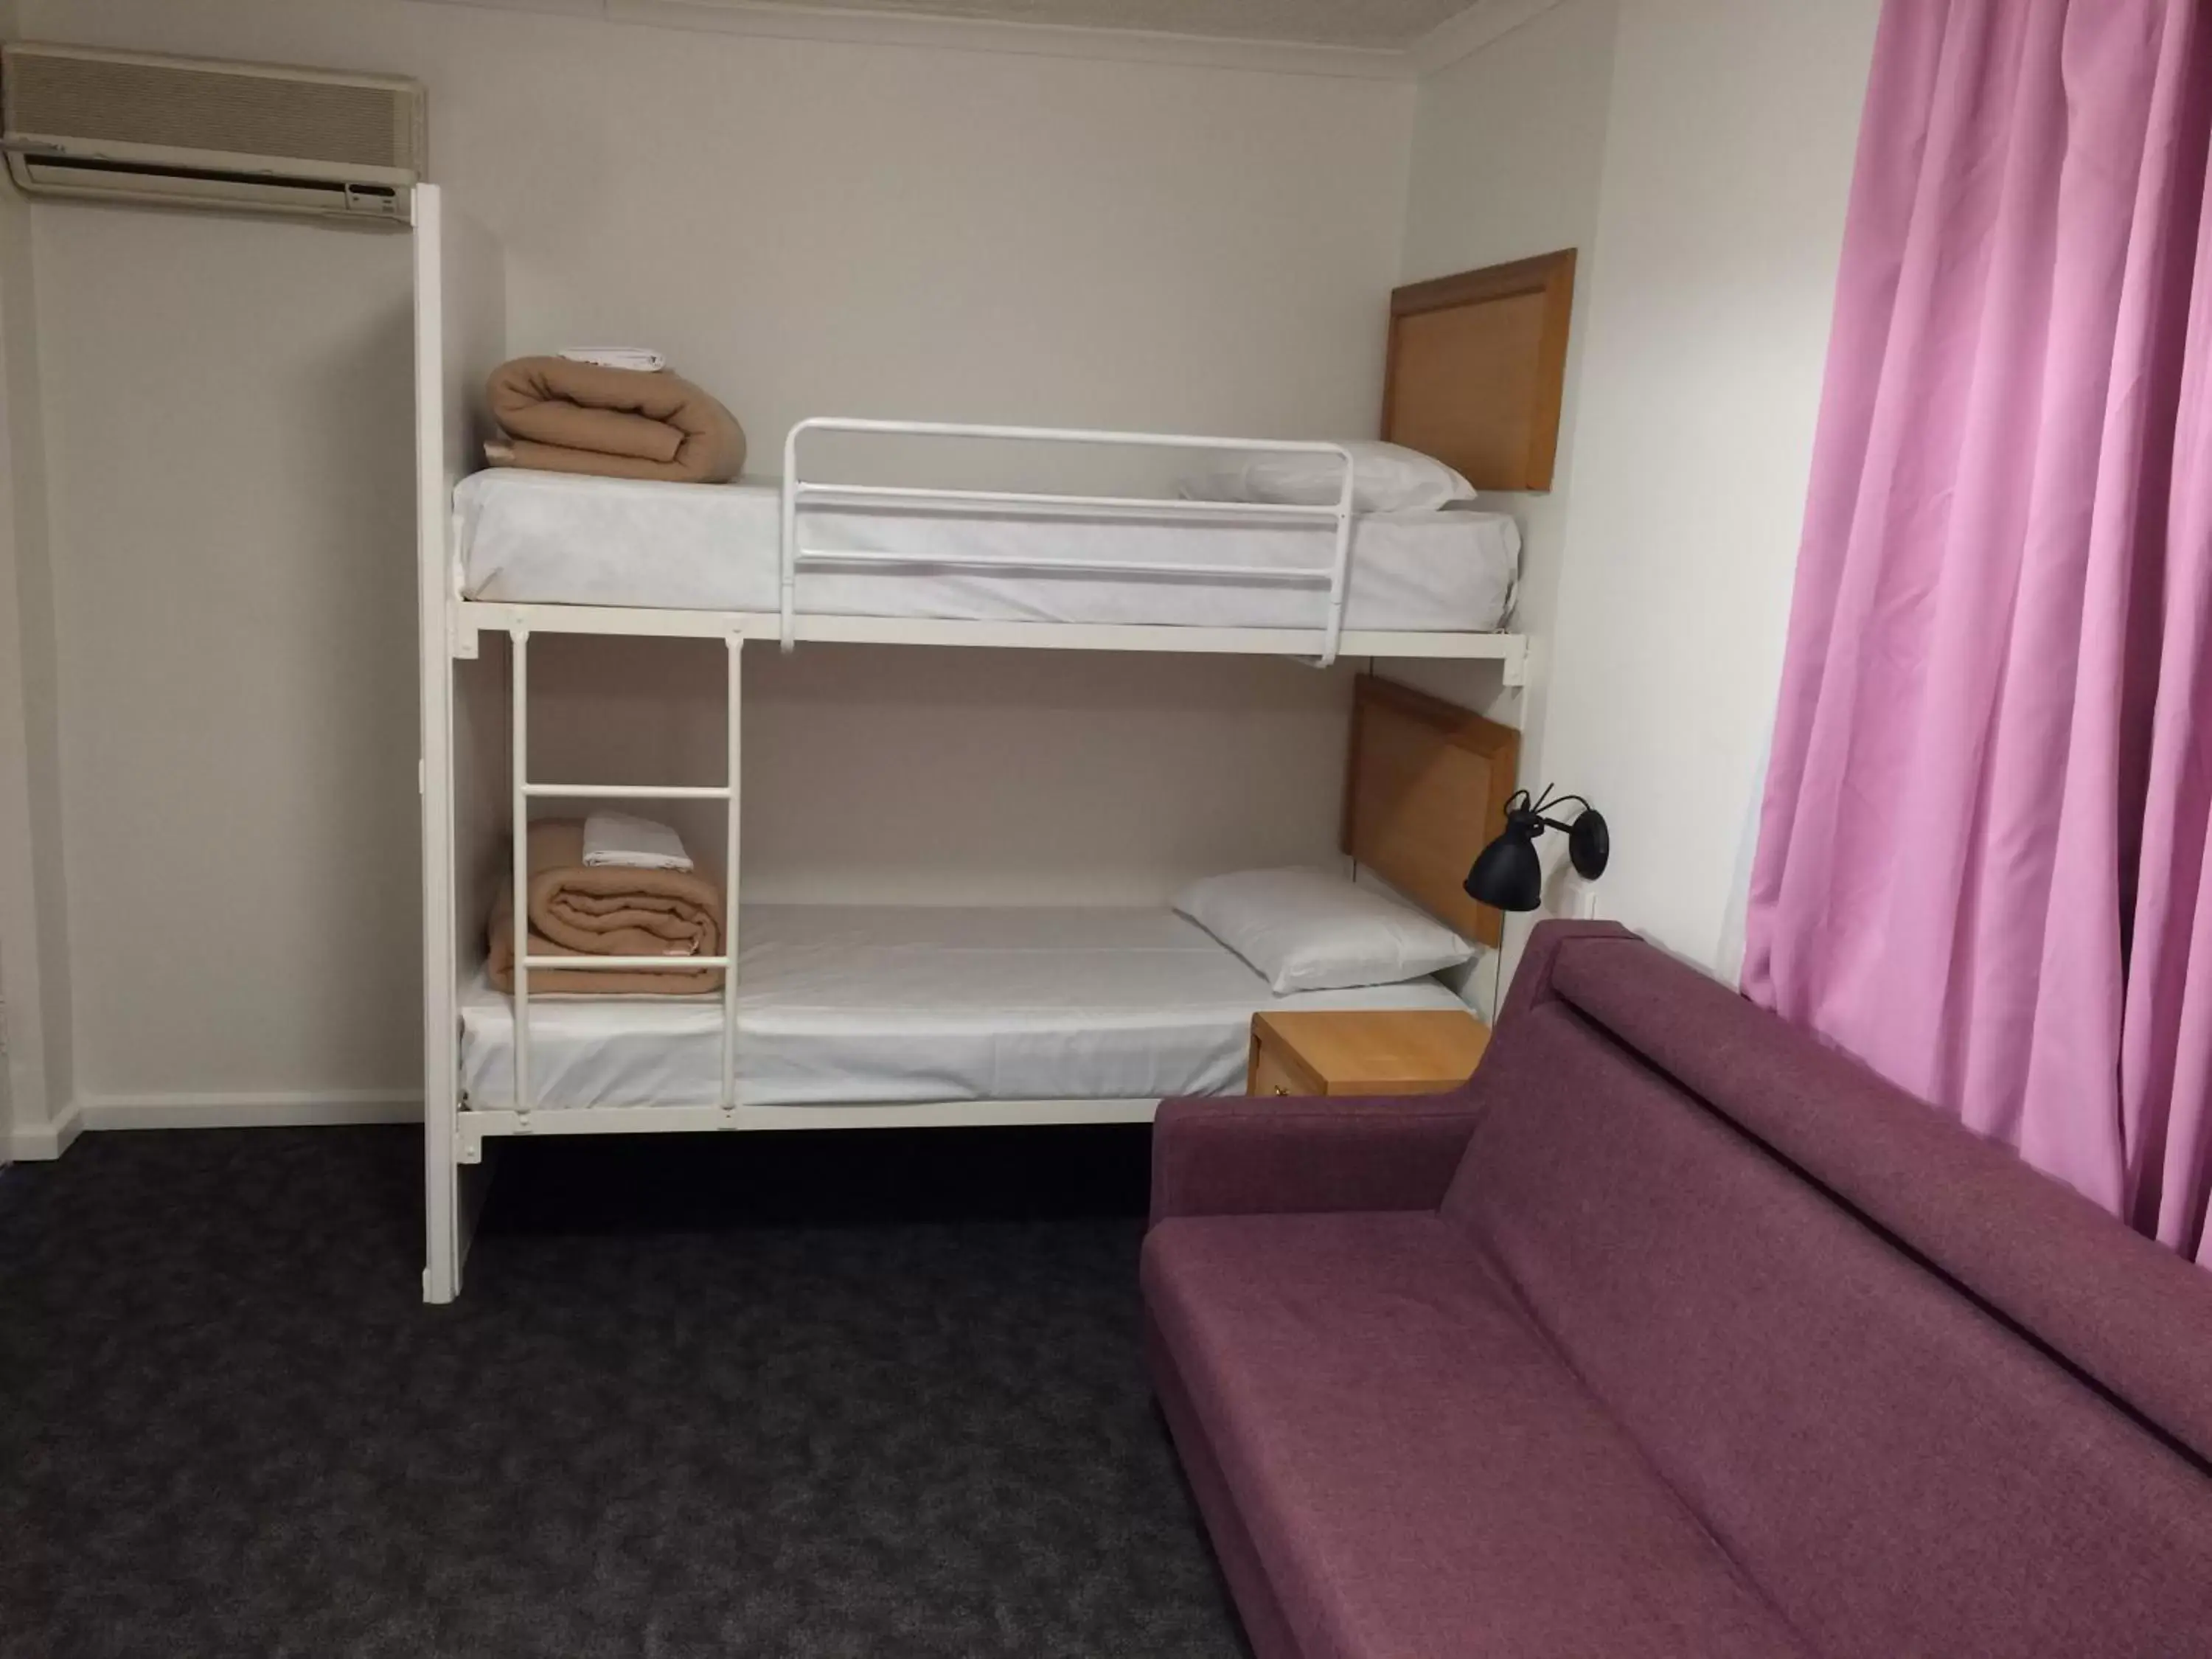 Bunk Bed in Edgecliff Lodge Motel